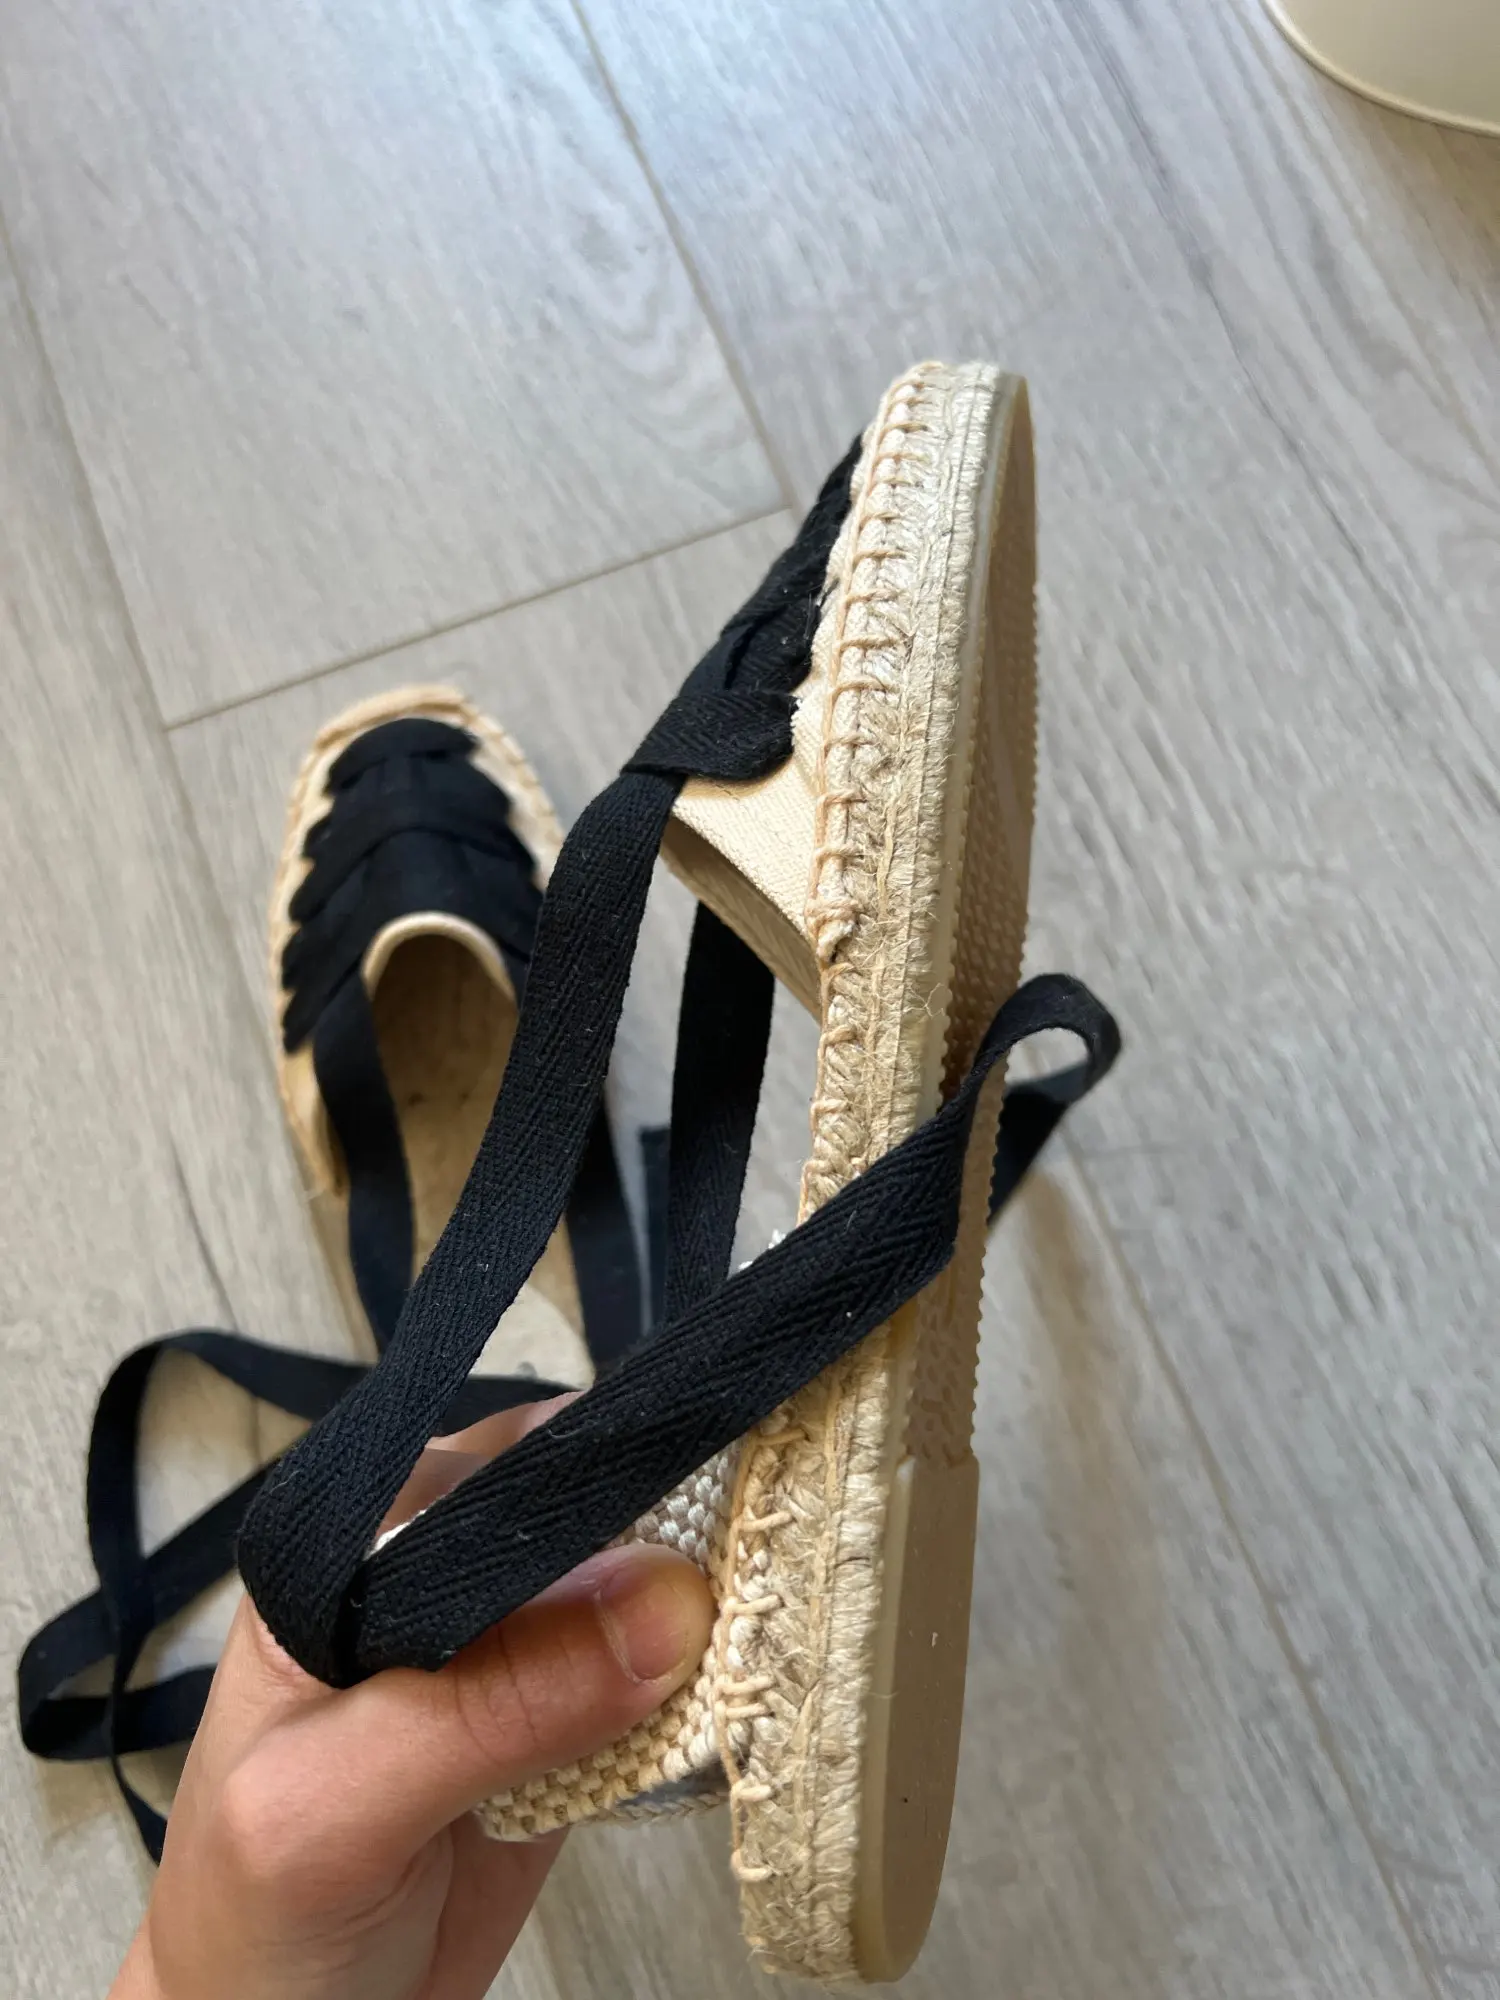 2020 Time-limited New Arrival Hemp T-strap Flat With Open Rubber Sapato Feminino Sandals Sandals Womens Espadrilles Flat Shoes